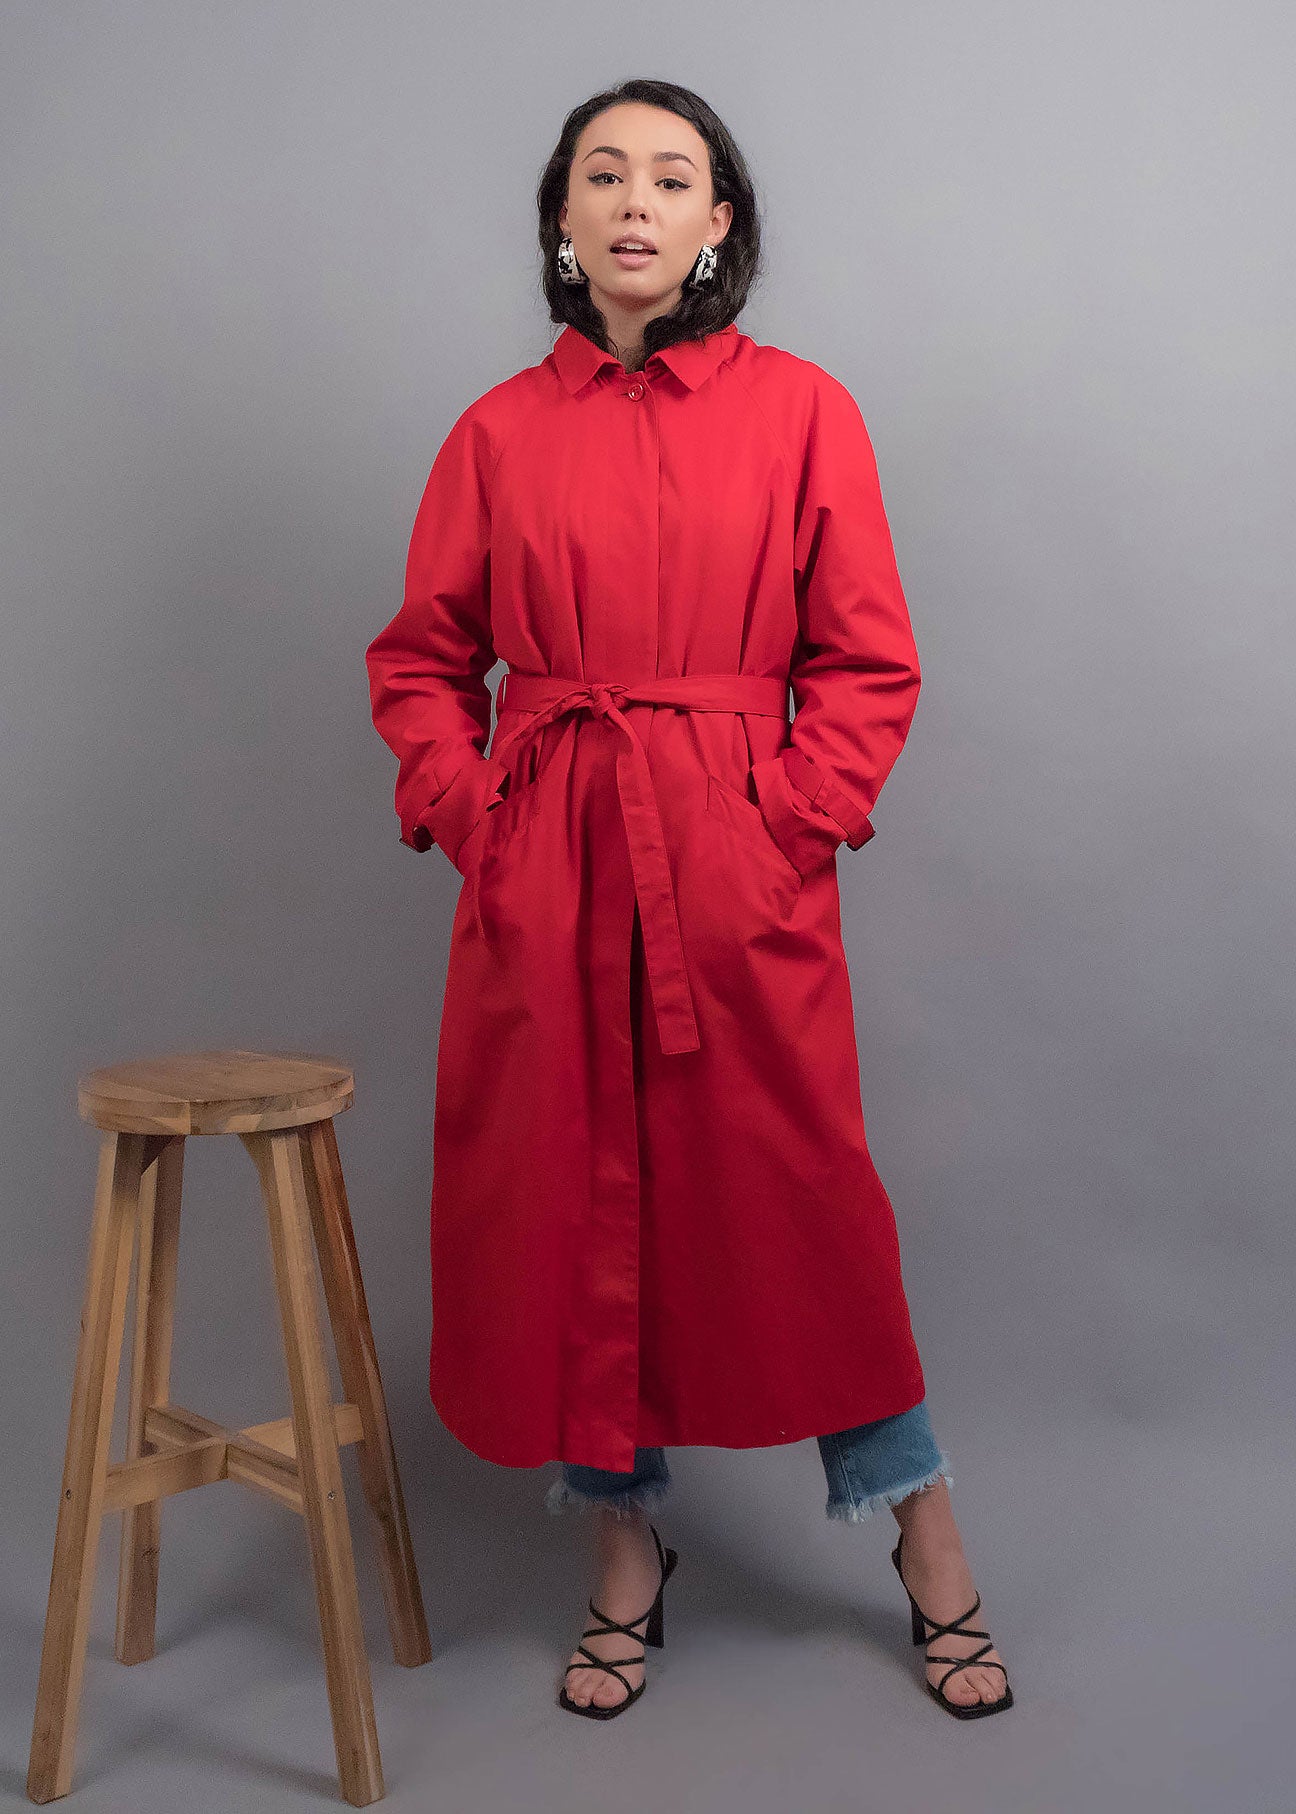 Fashion Classic for Autumn: A rusty red Trench Coat by Ginger Jackie